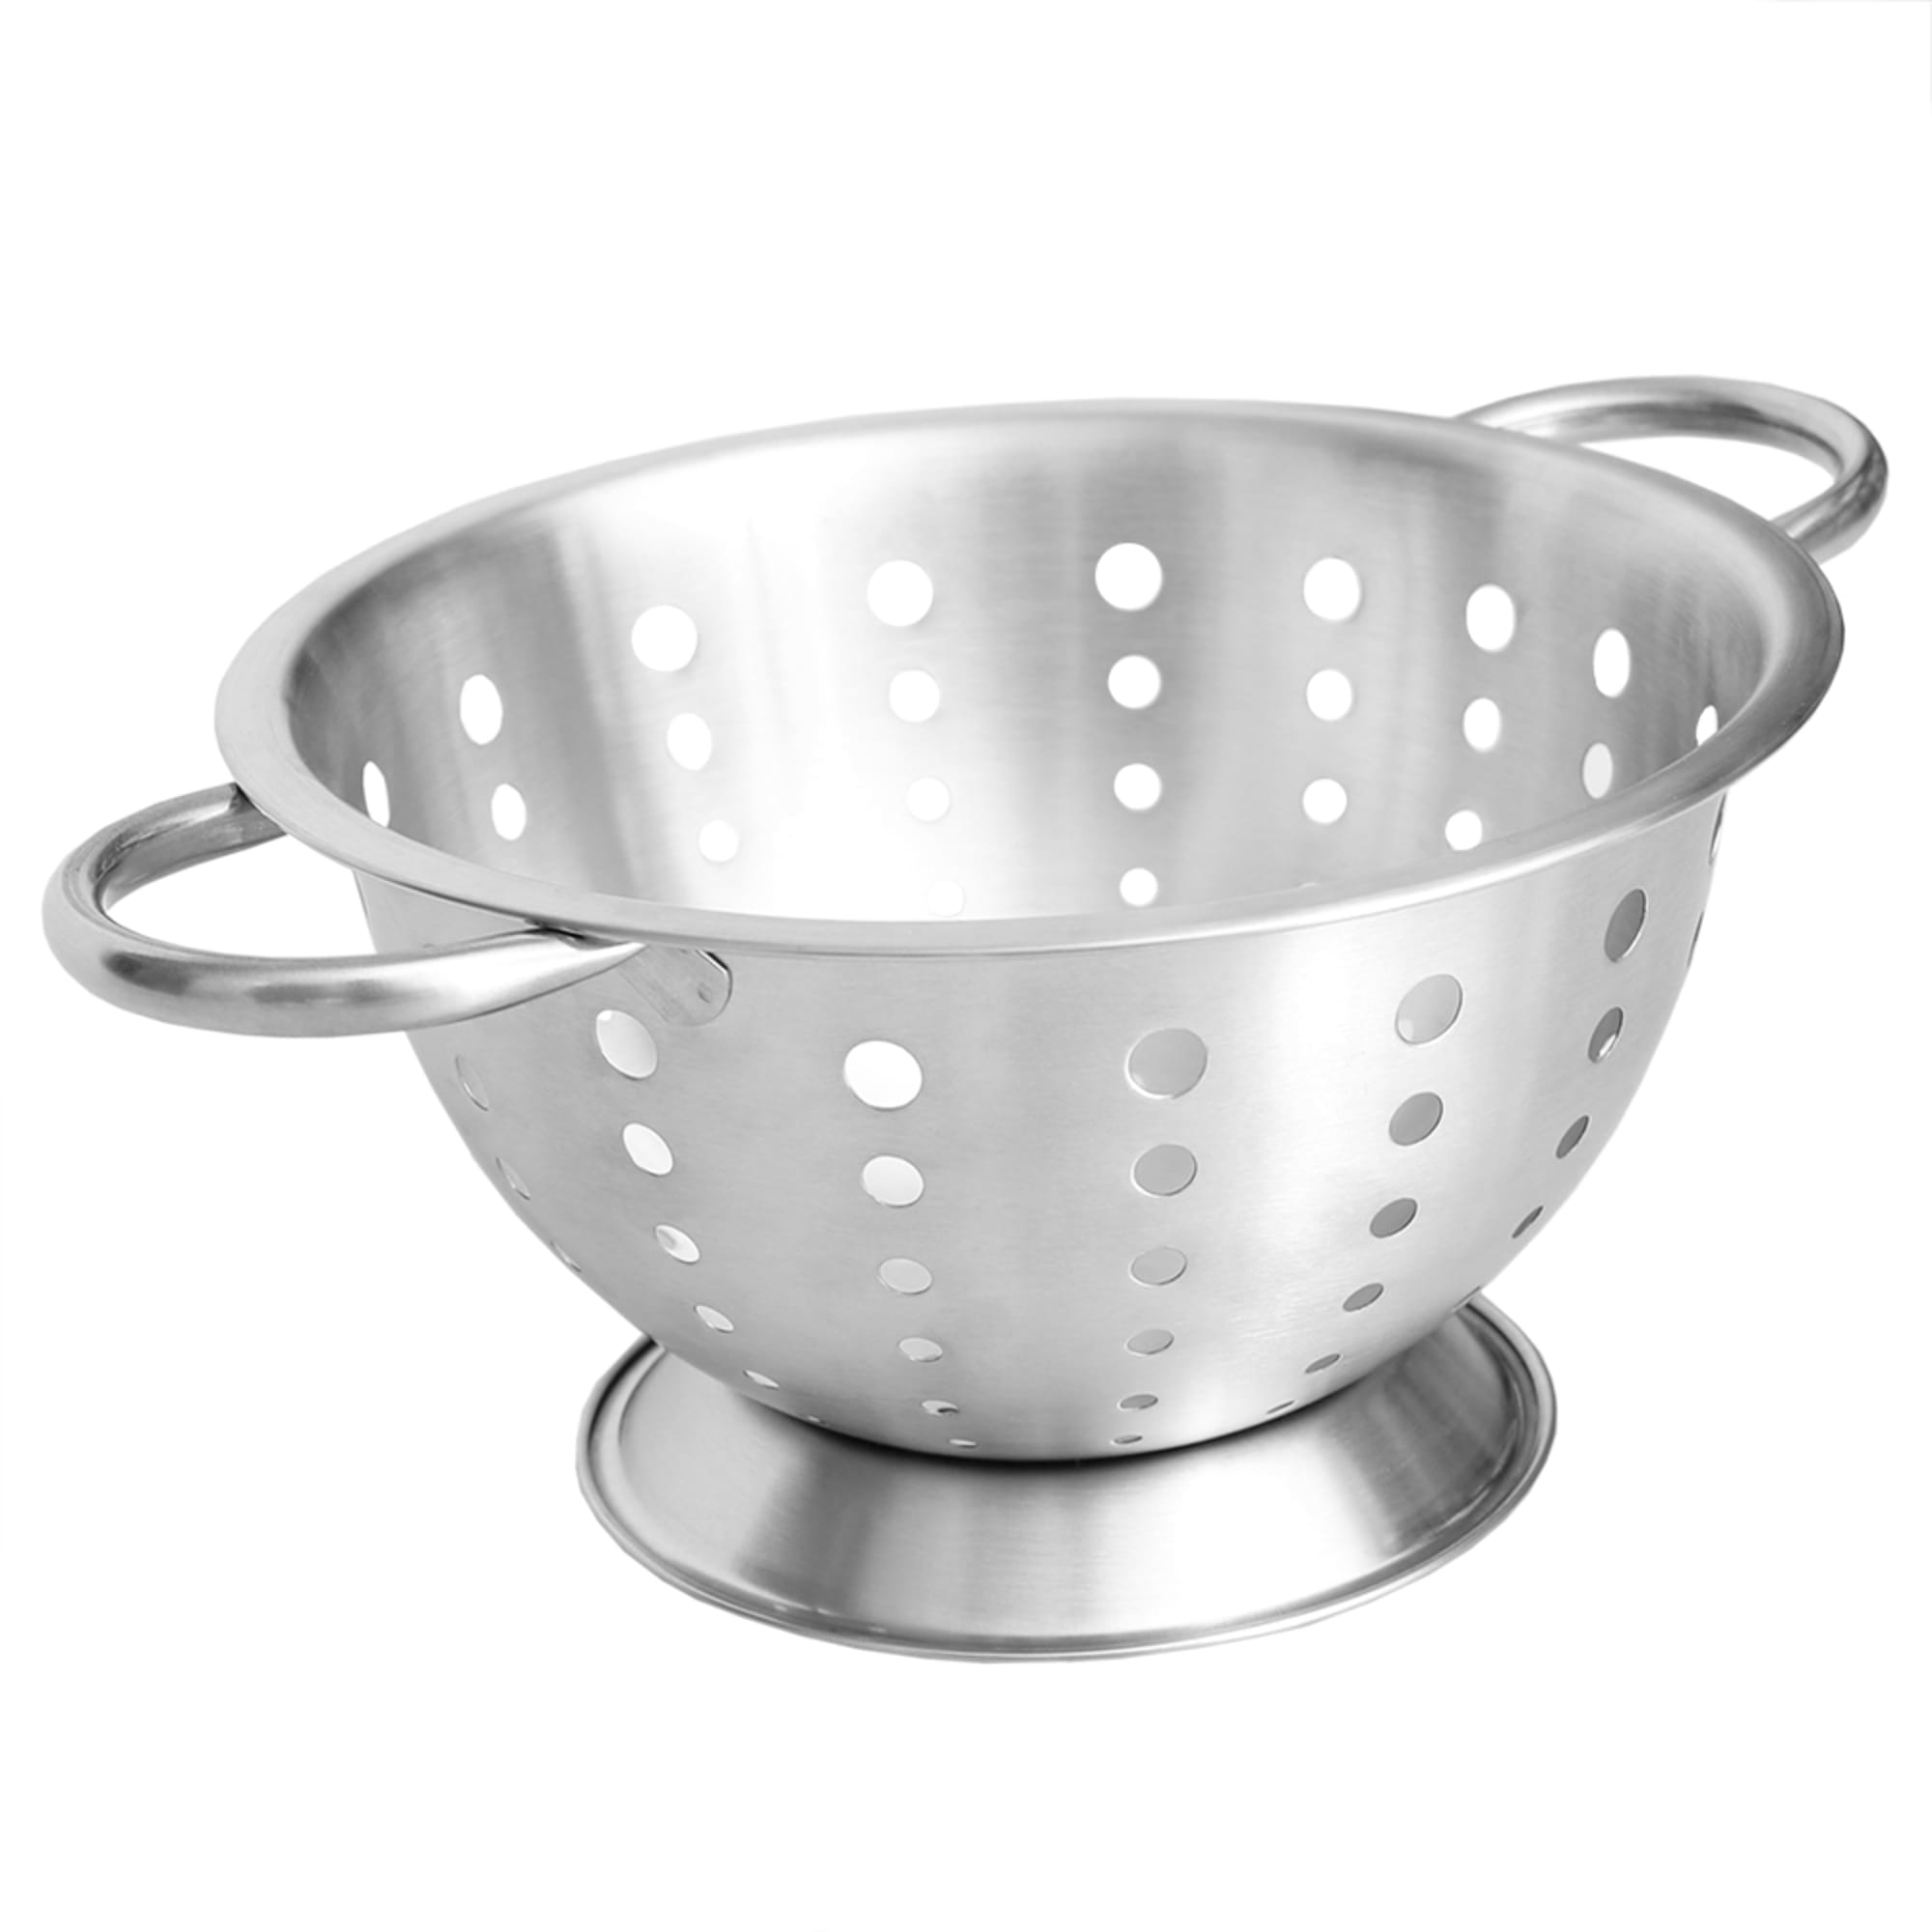 Home Basics 3 Qt Deep Stainless Steel Colander with Easy Grip Handles, Silver $4.00 EACH, CASE PACK OF 12